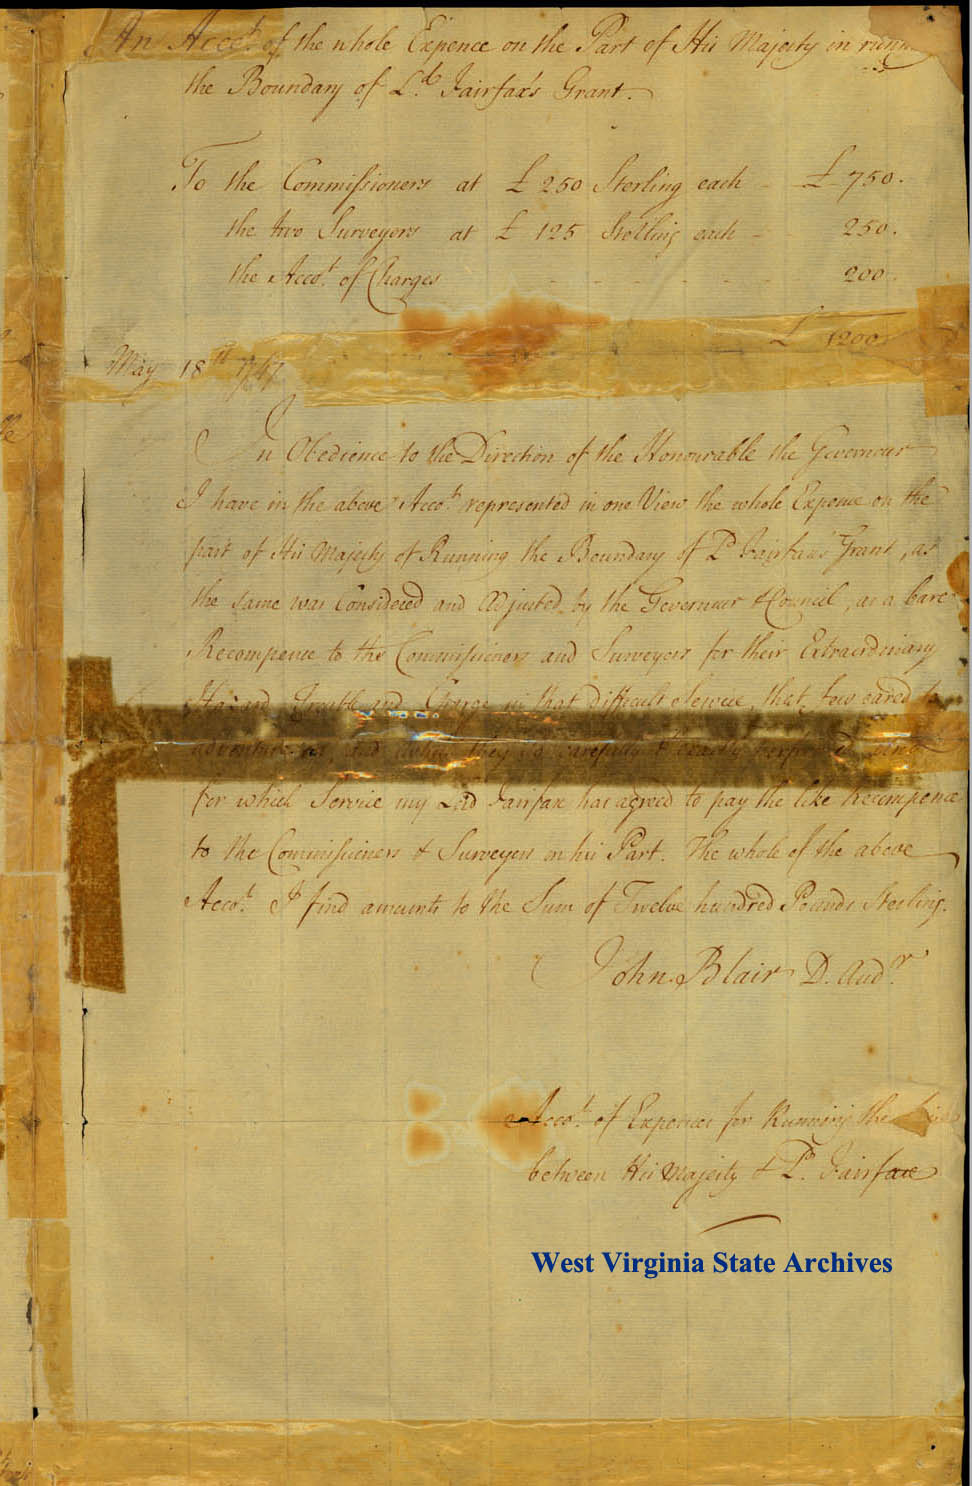 Papers related to the expense of running the boundary line to divide the Northern Neck land grant of Lord Fairfax, 1747. (Ms79-3))